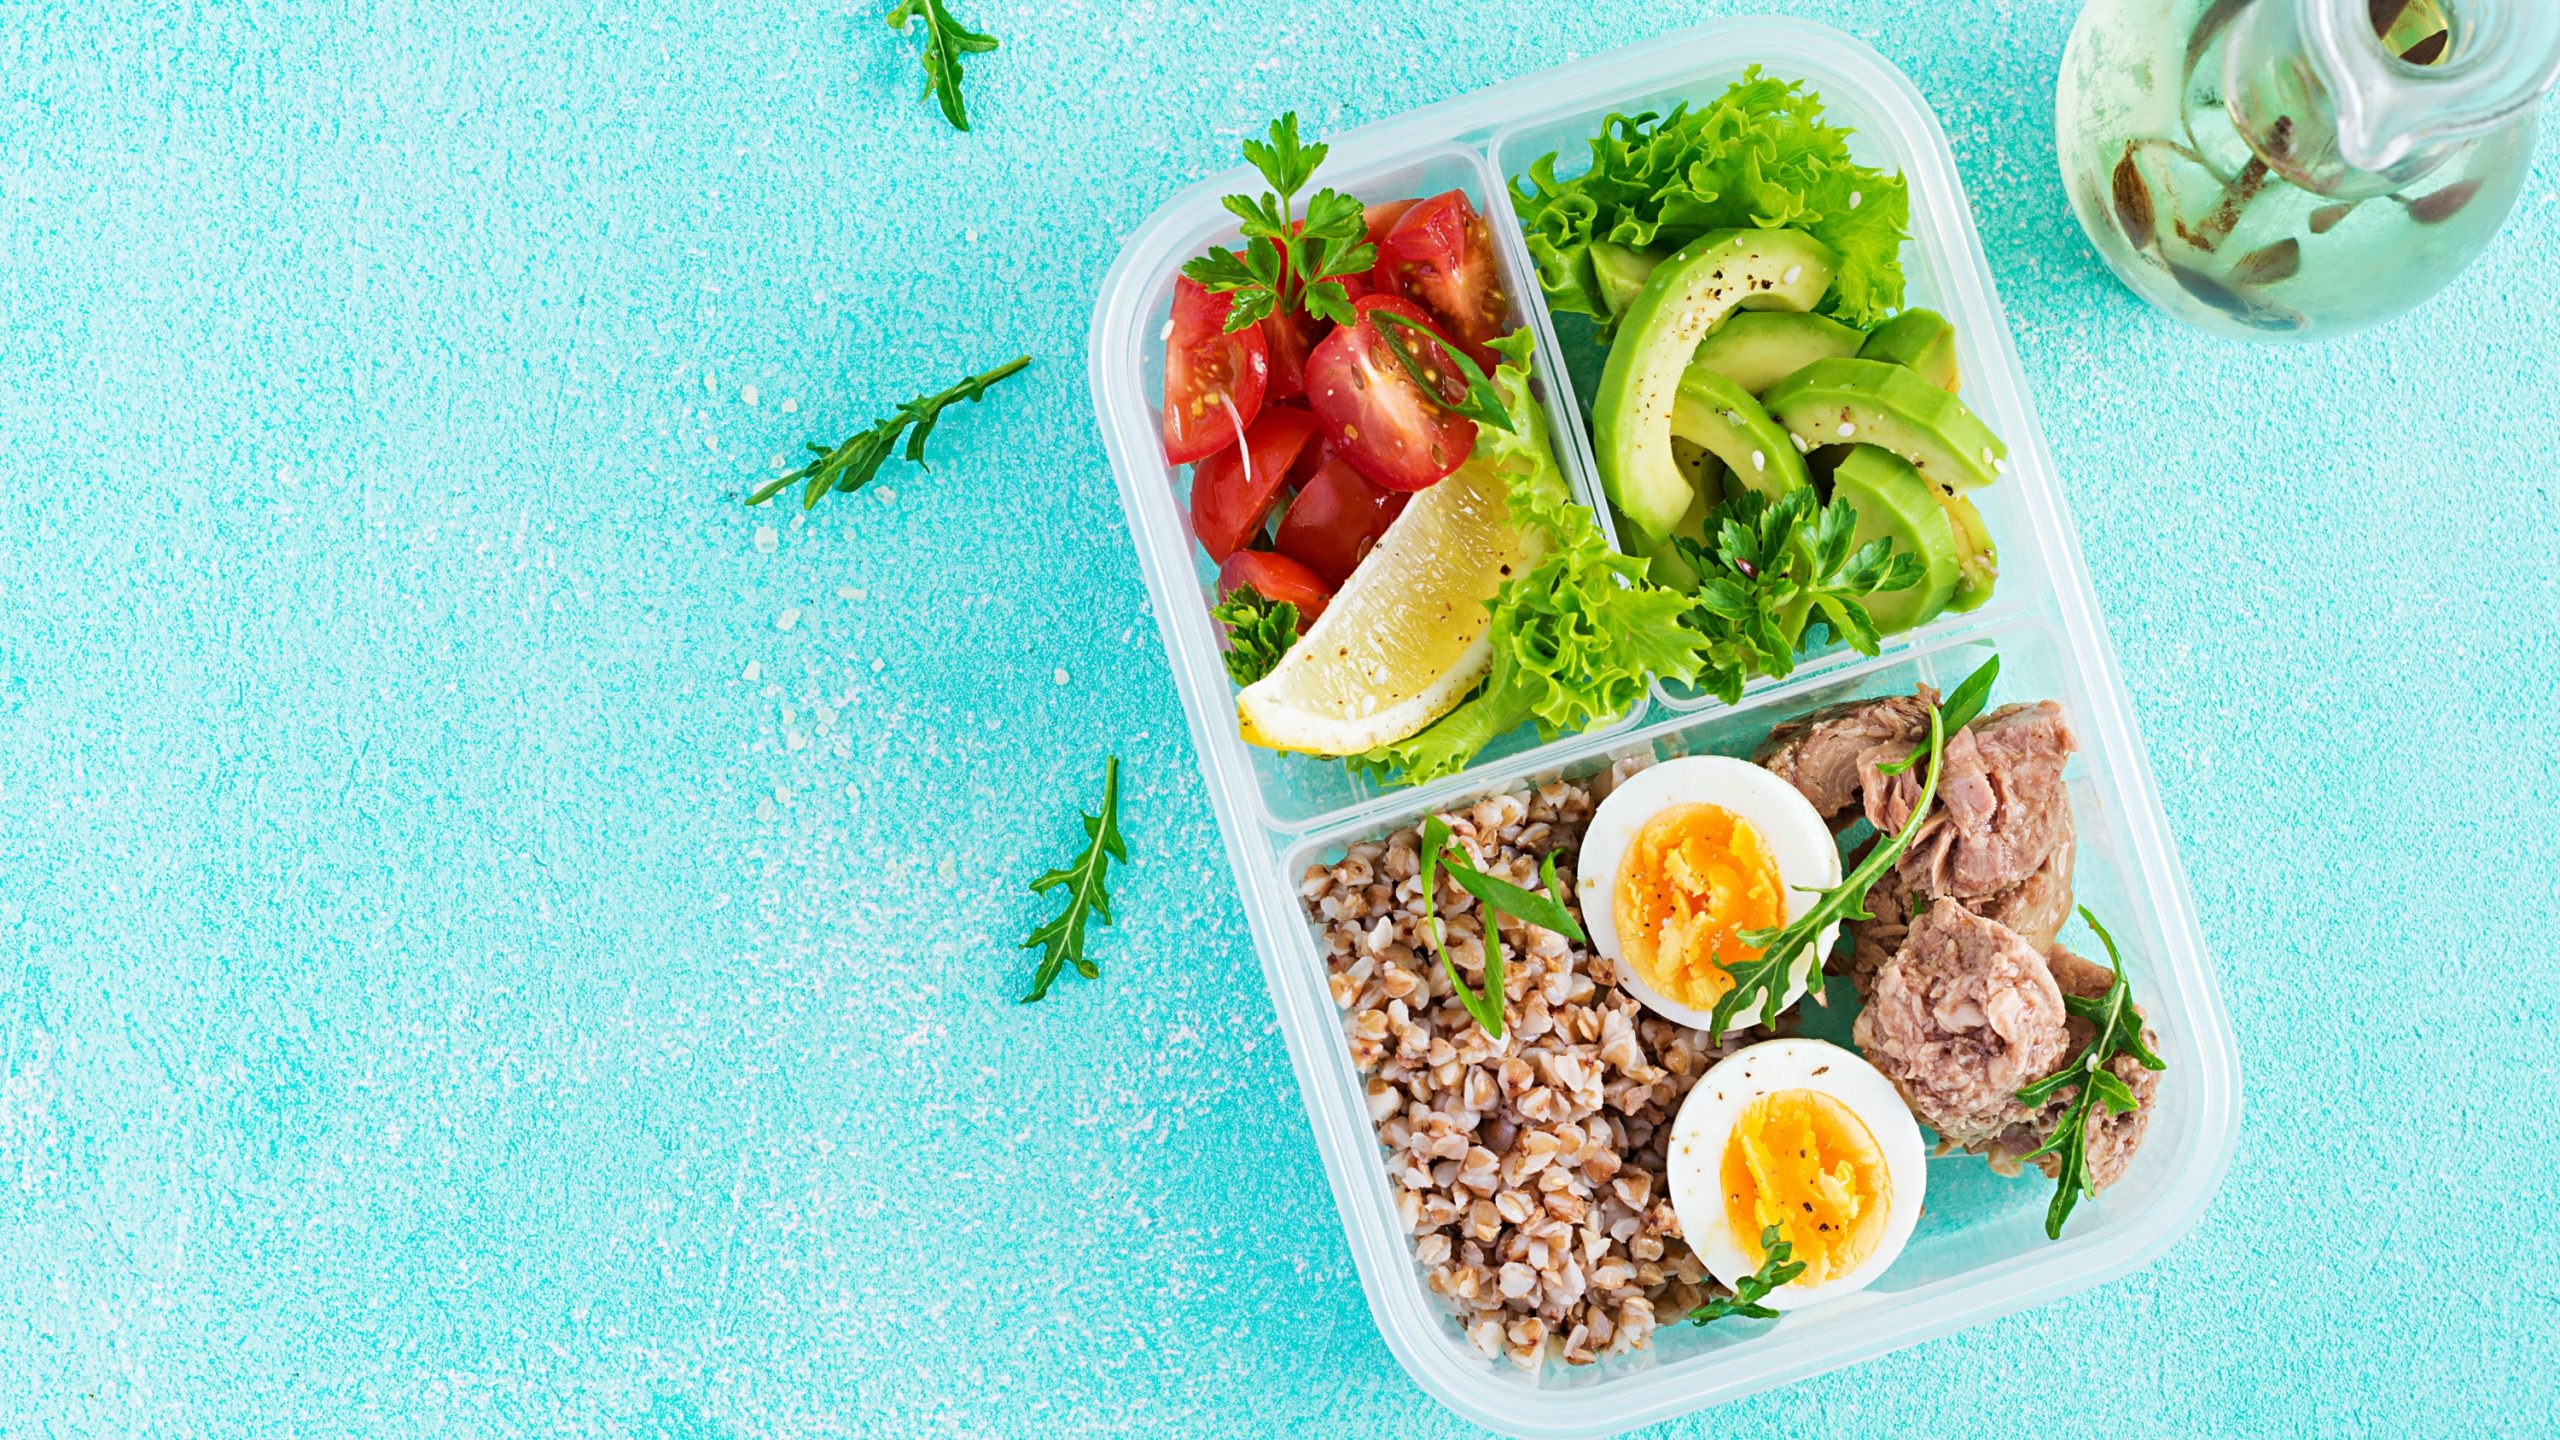 10 of the Best Cheap and Healthy Cold Lunches, According to Reddit